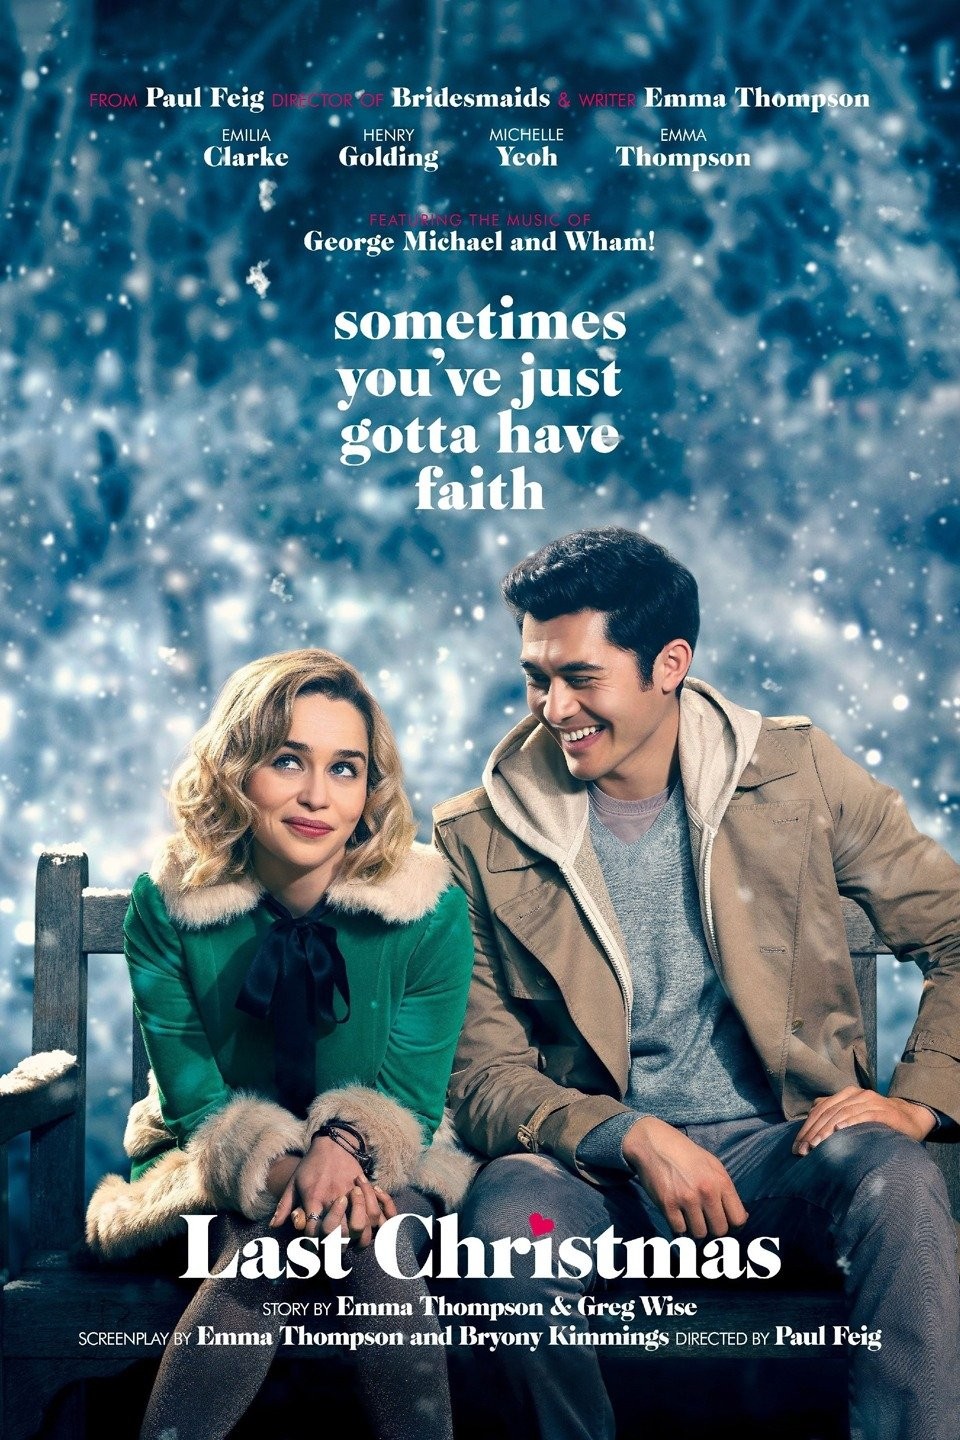 A Mom for Christmas - Rotten Tomatoes